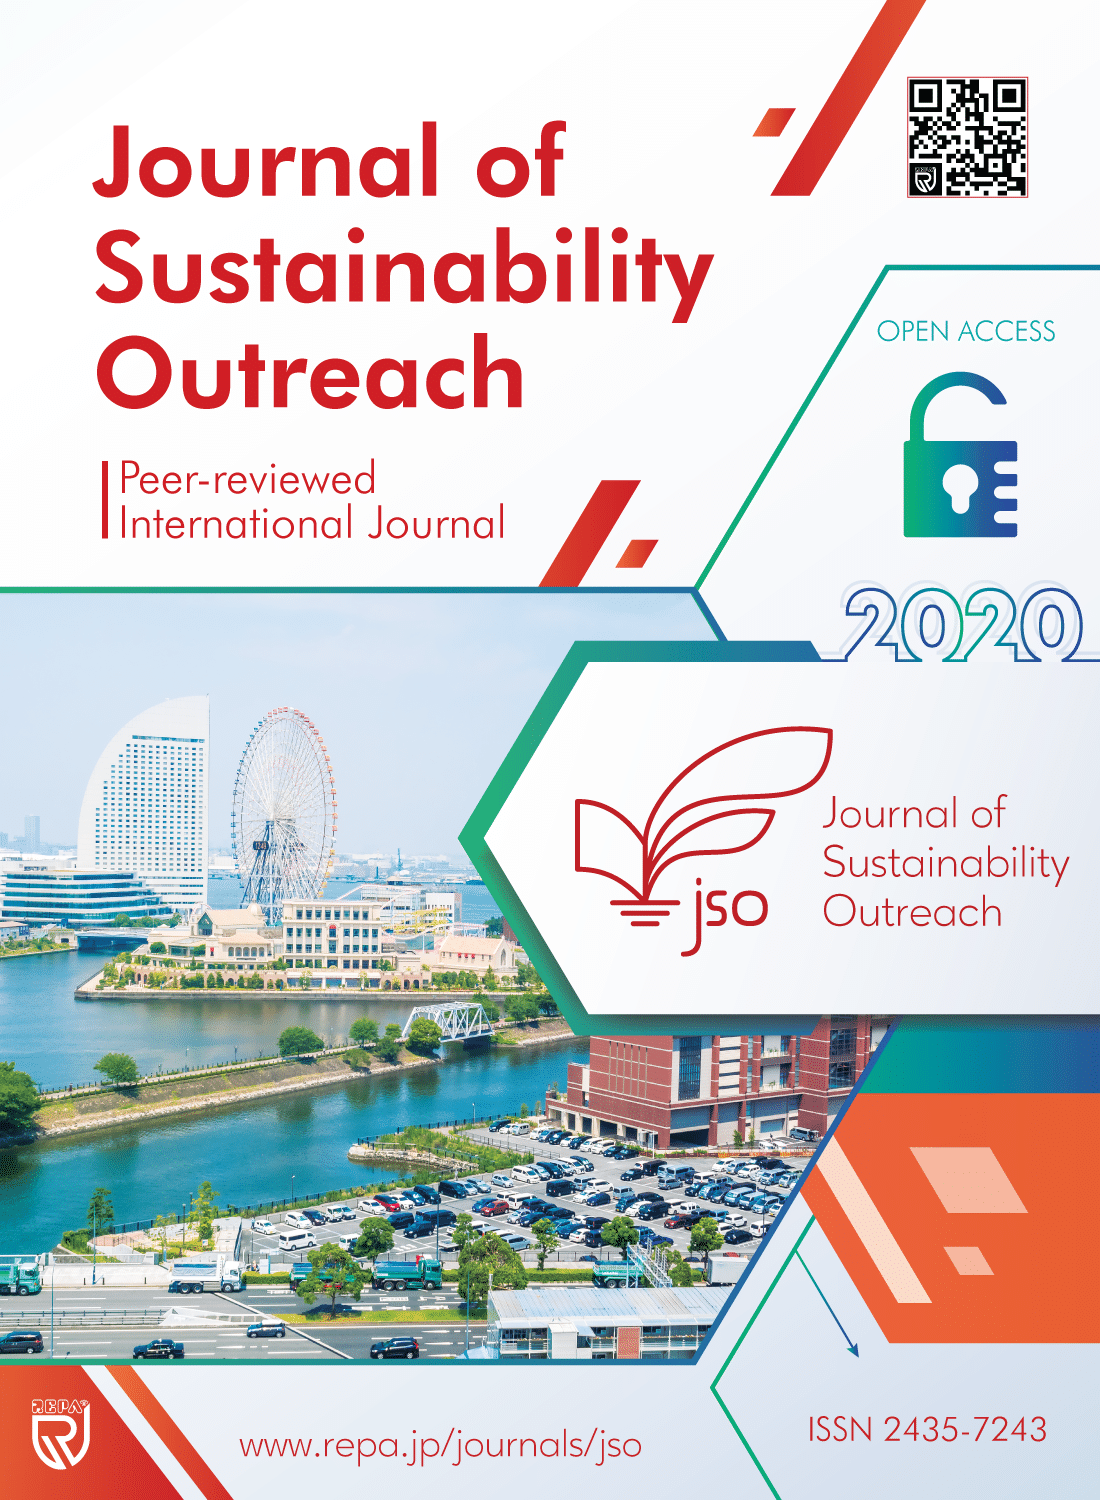 Journal of Sustainability Outreach - JSO